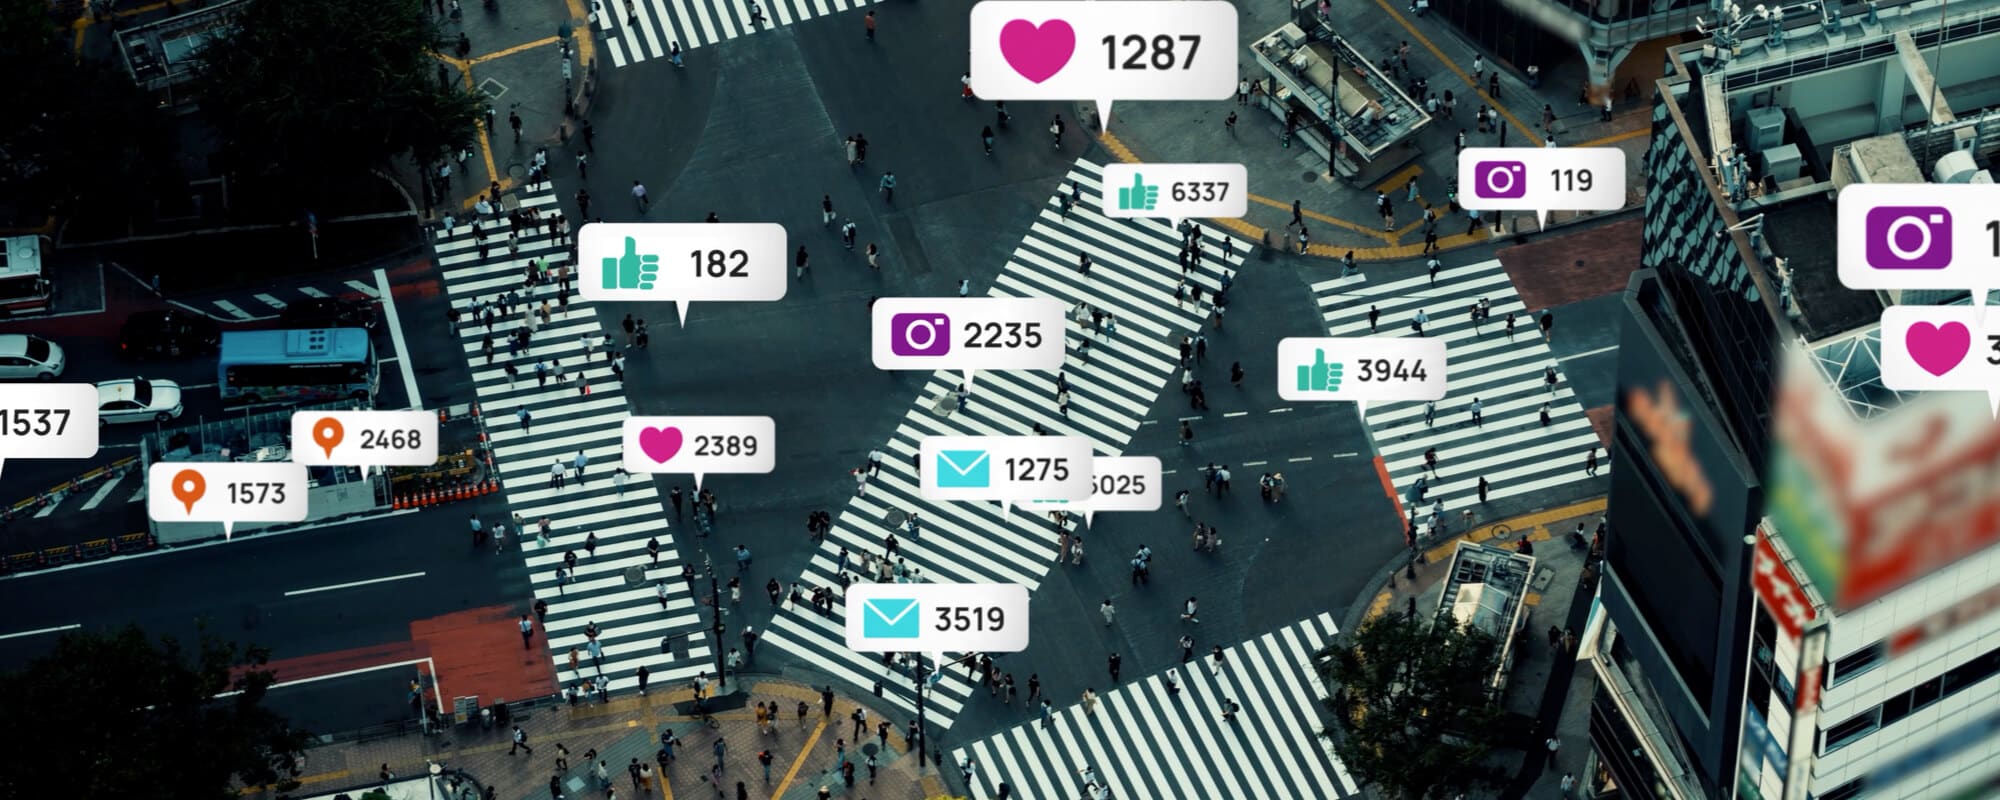 Global social media, notifications showing on pavement